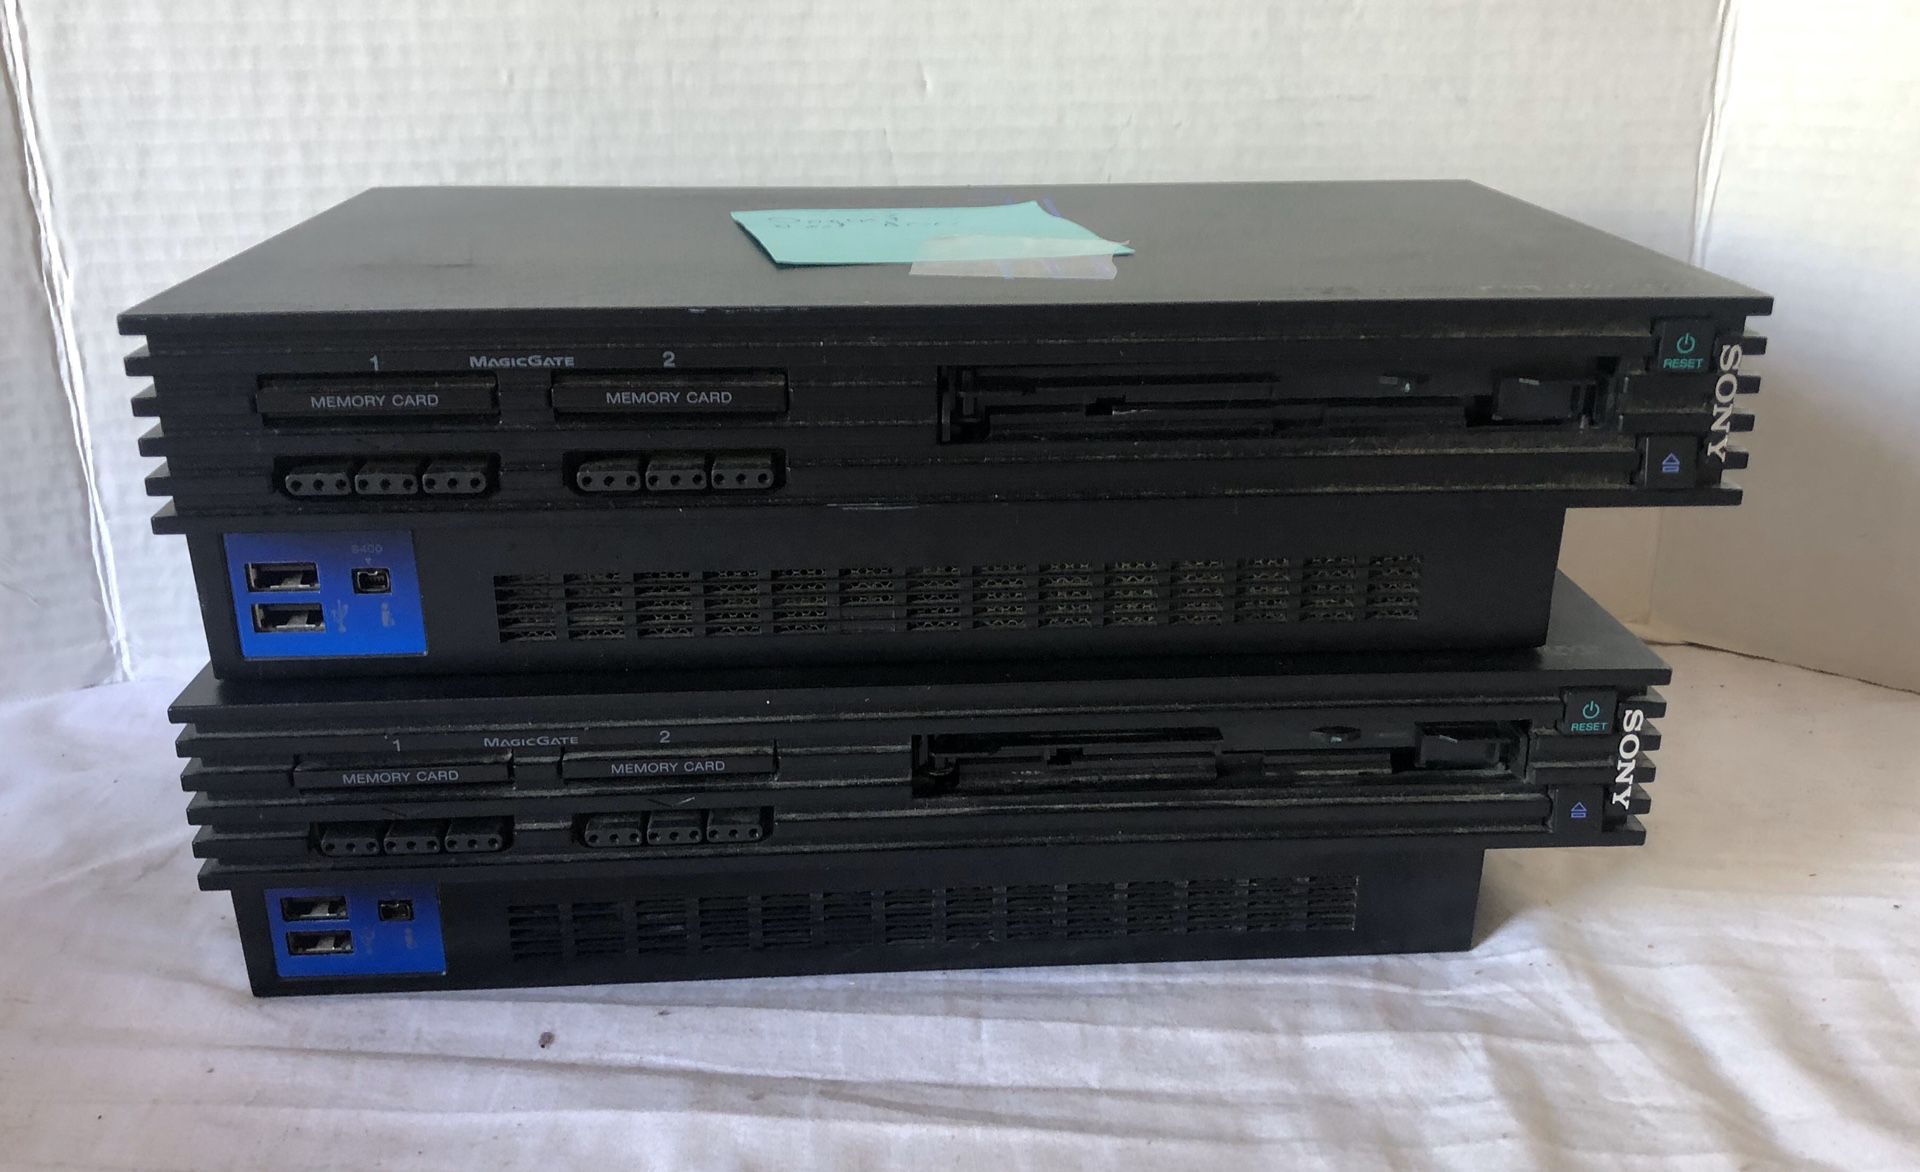 Playstation 2, PS2, for repairs or parts. Not functioning properly.